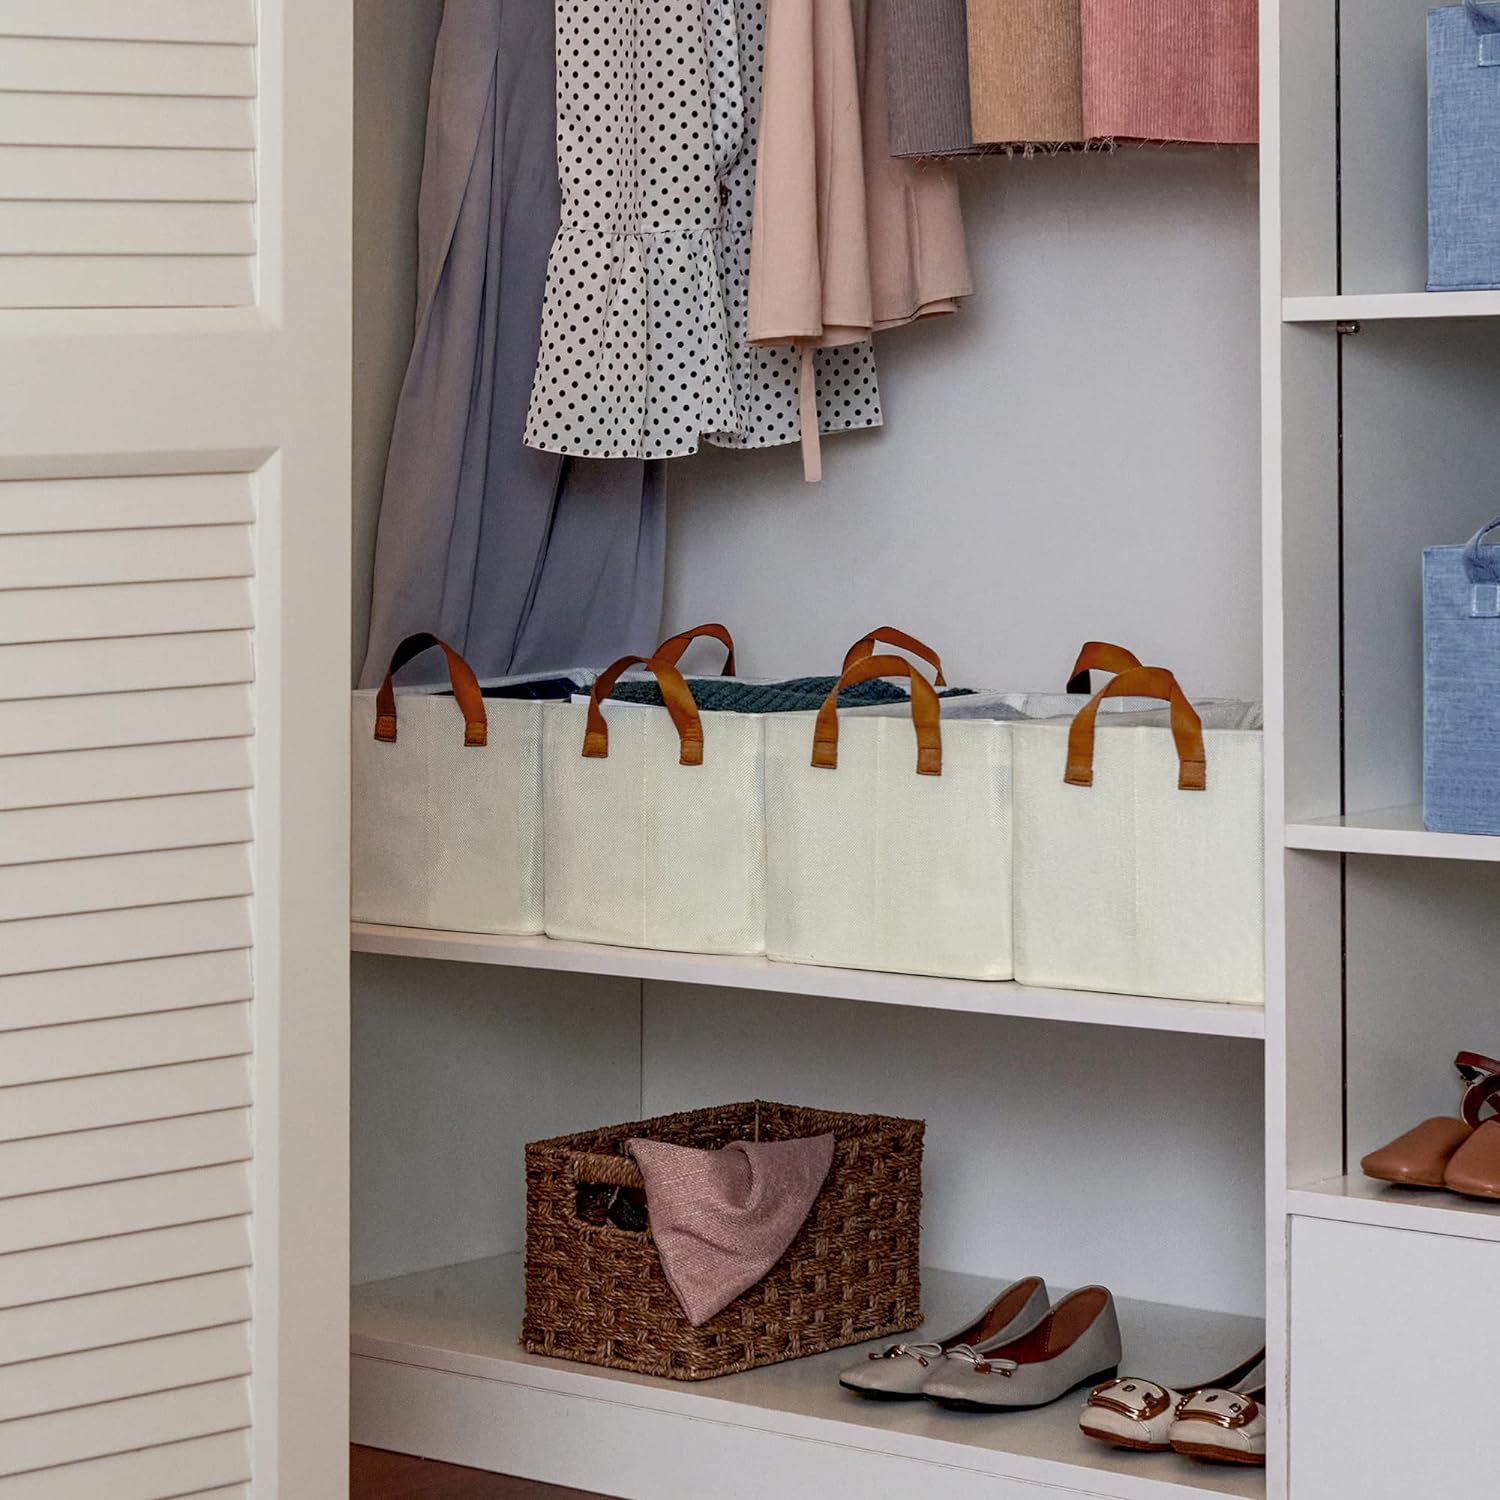 Blushbees Storage Baskets with Metal Frame for Organizing Wardrobe, Shelves, Bedroom and Closet.